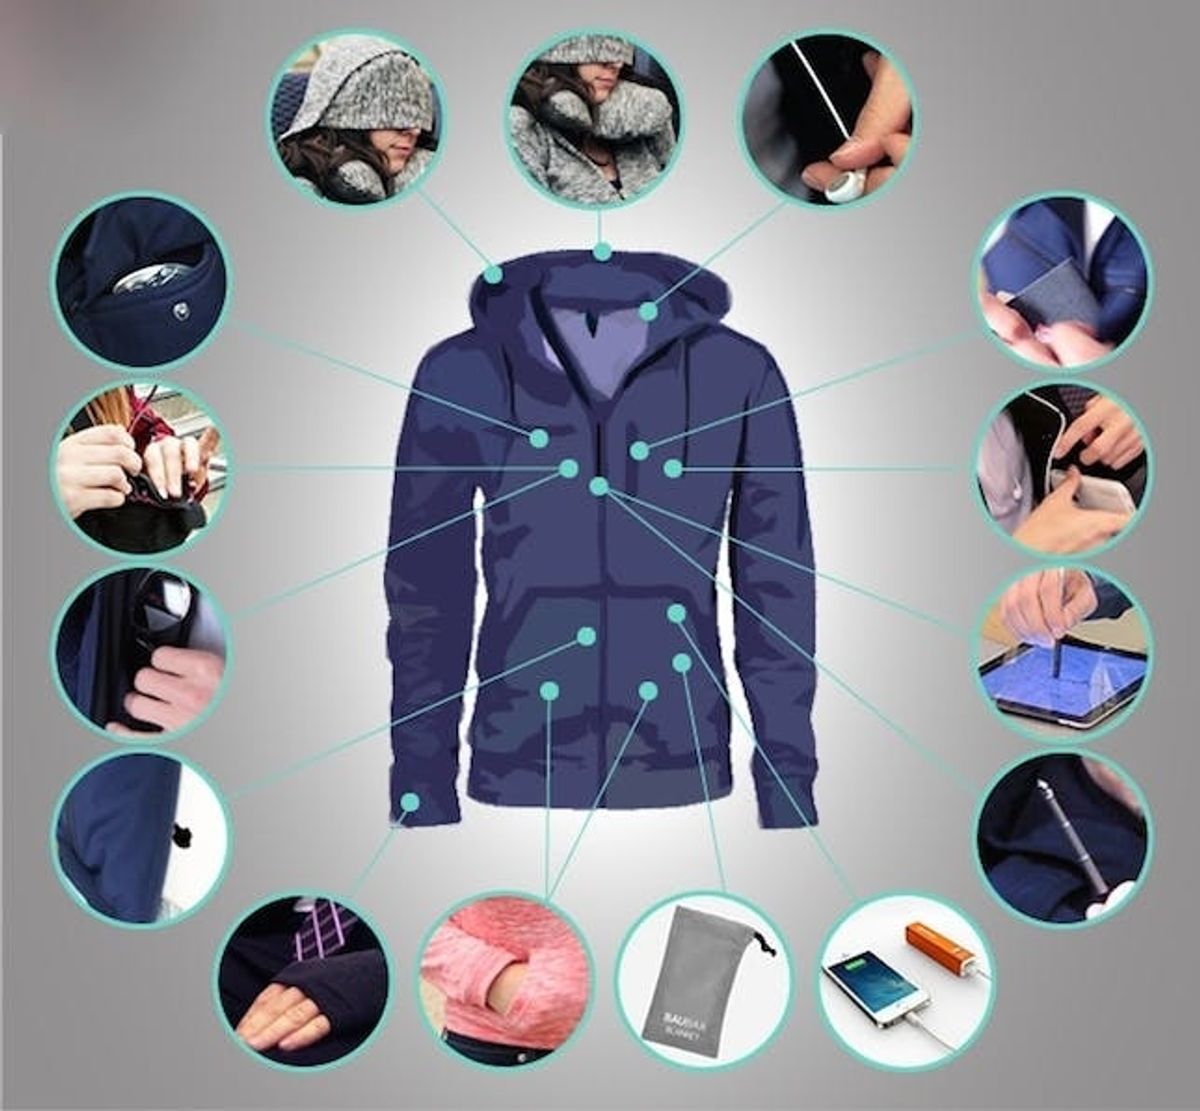 This Amazing Hoodie Is like a Swiss Army Knife You Can Wear